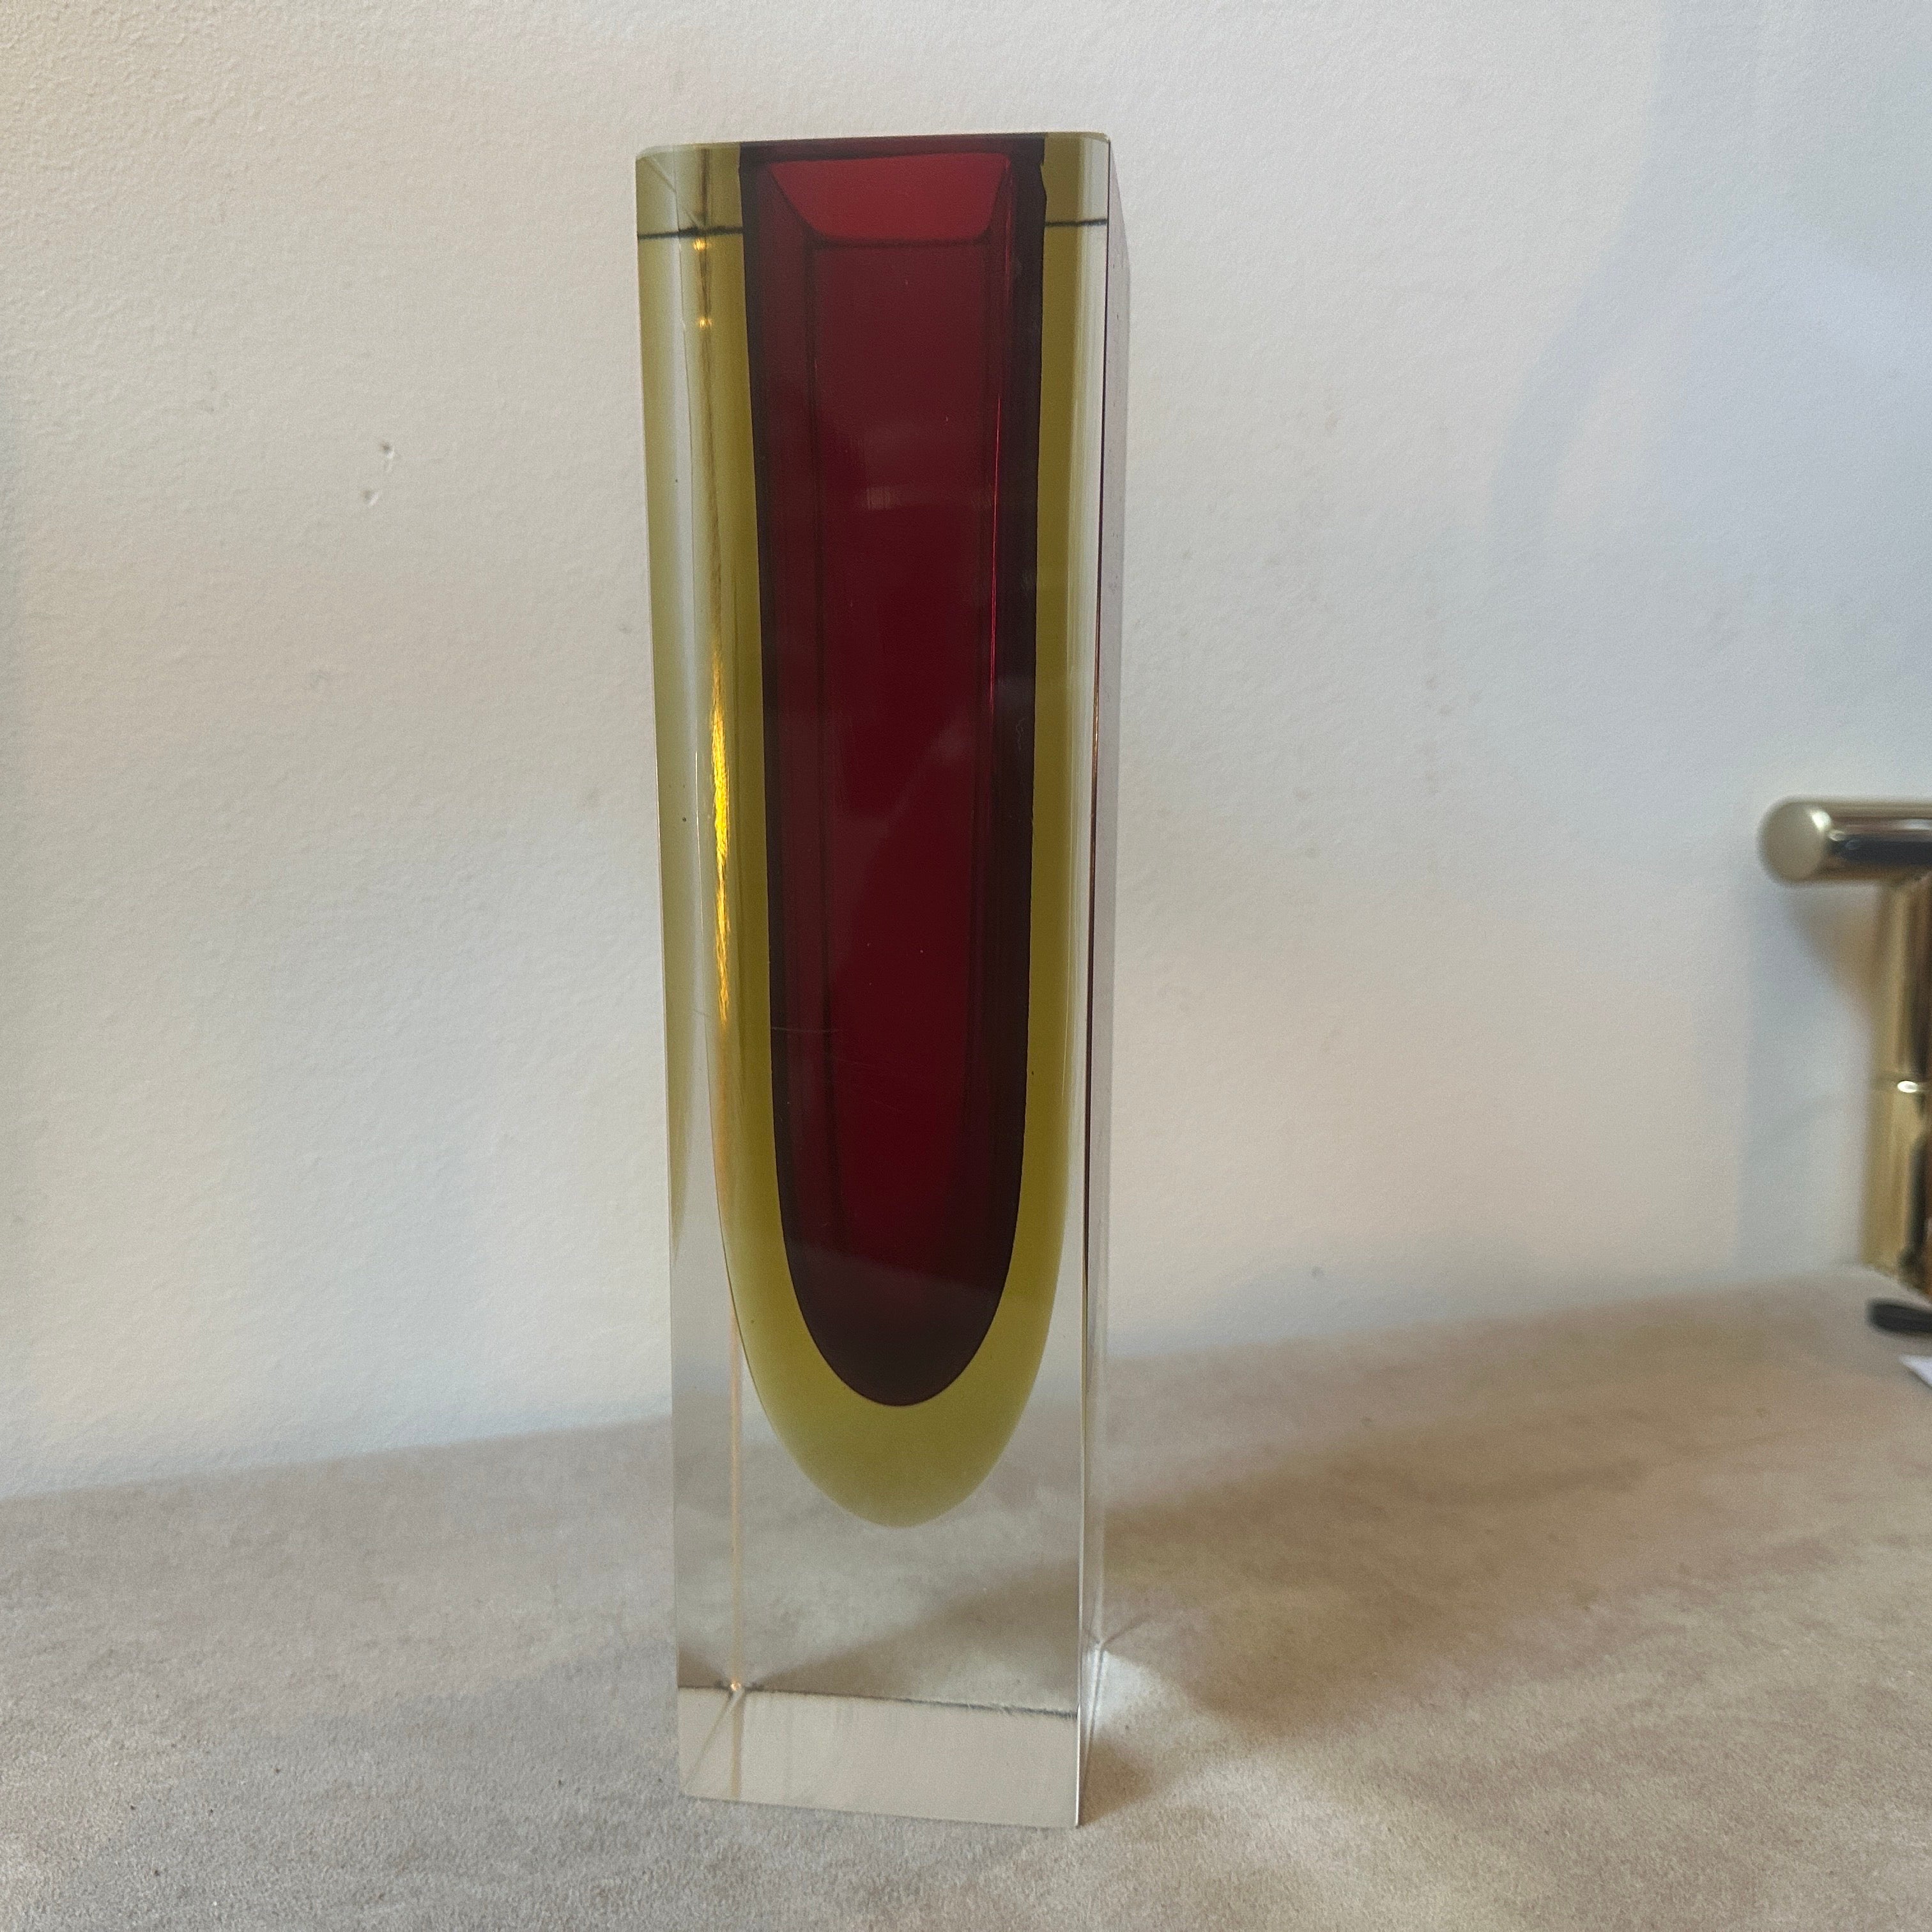 A square murano glass vase designed and manufactured in Italy in the Sixties by Seguso, it's in perfect condition. This Vase by Seguso is a stunning example of the innovative glassmaking techniques that characterized the mid-20th century Murano art